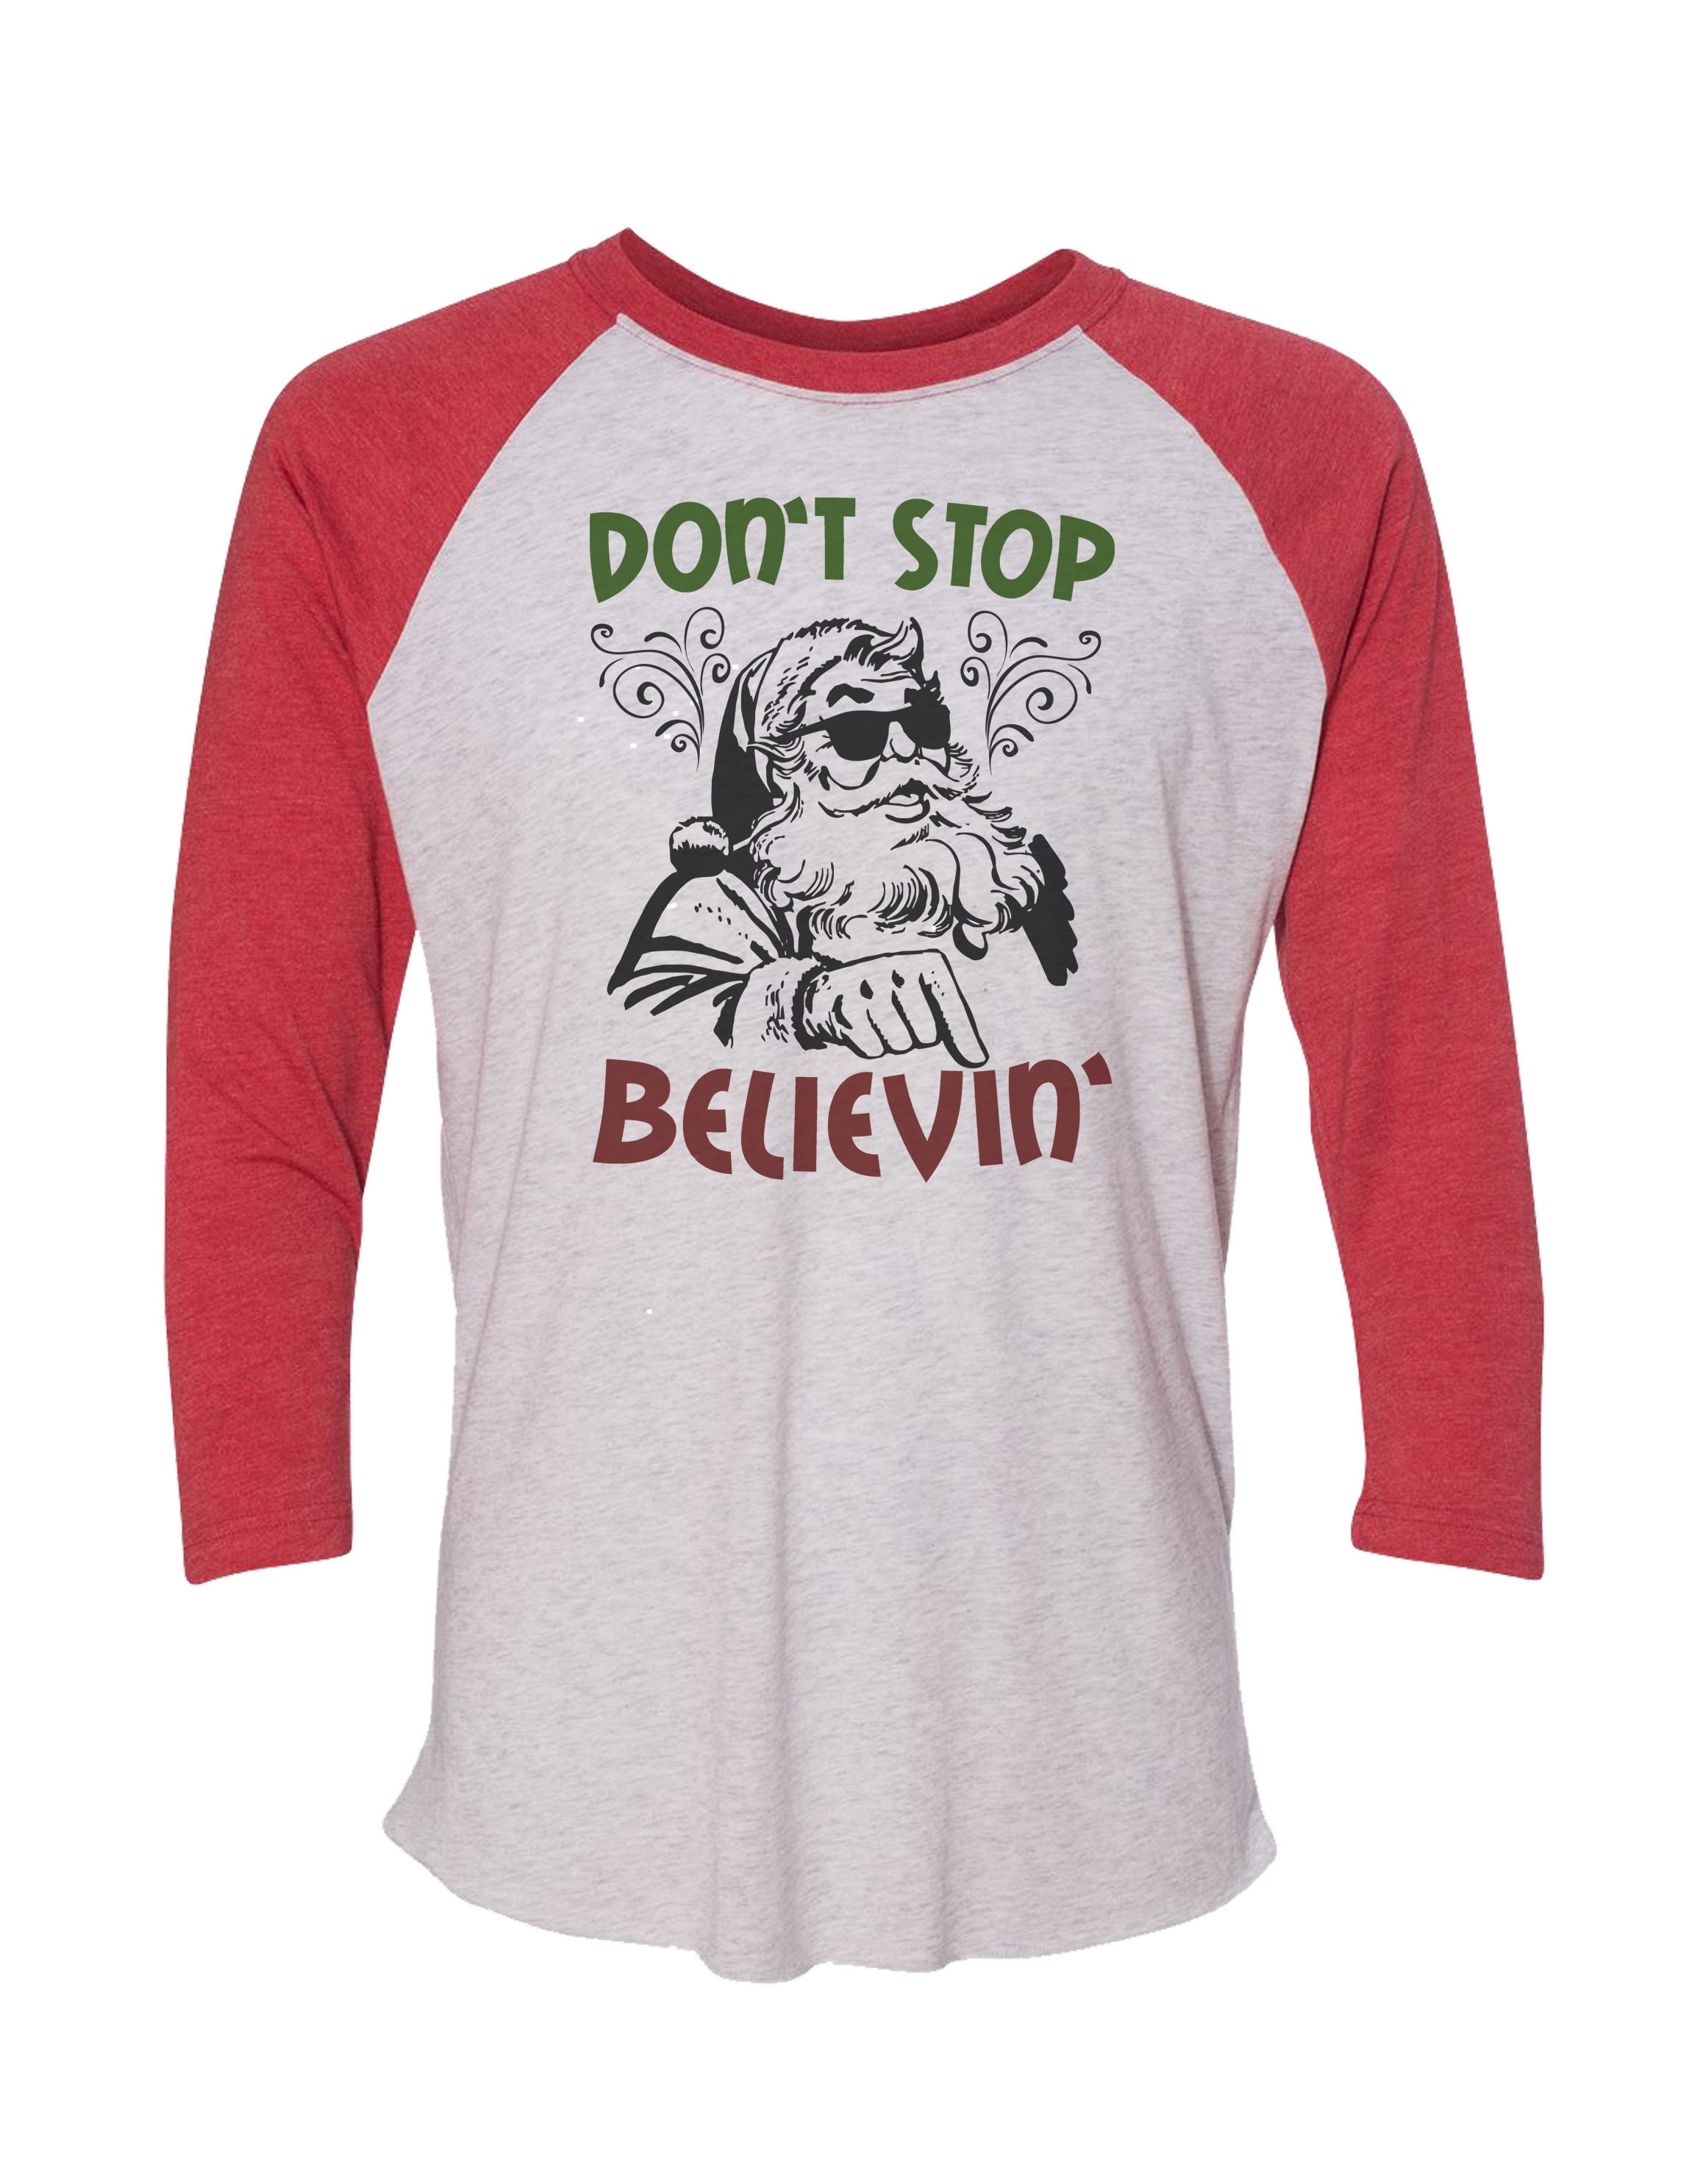 Unisex Christmas Super Soft Tri-Blend Baseball Style Shirt Don't Stop Believin Funny Ugly Sweater Holiday Party - 925"